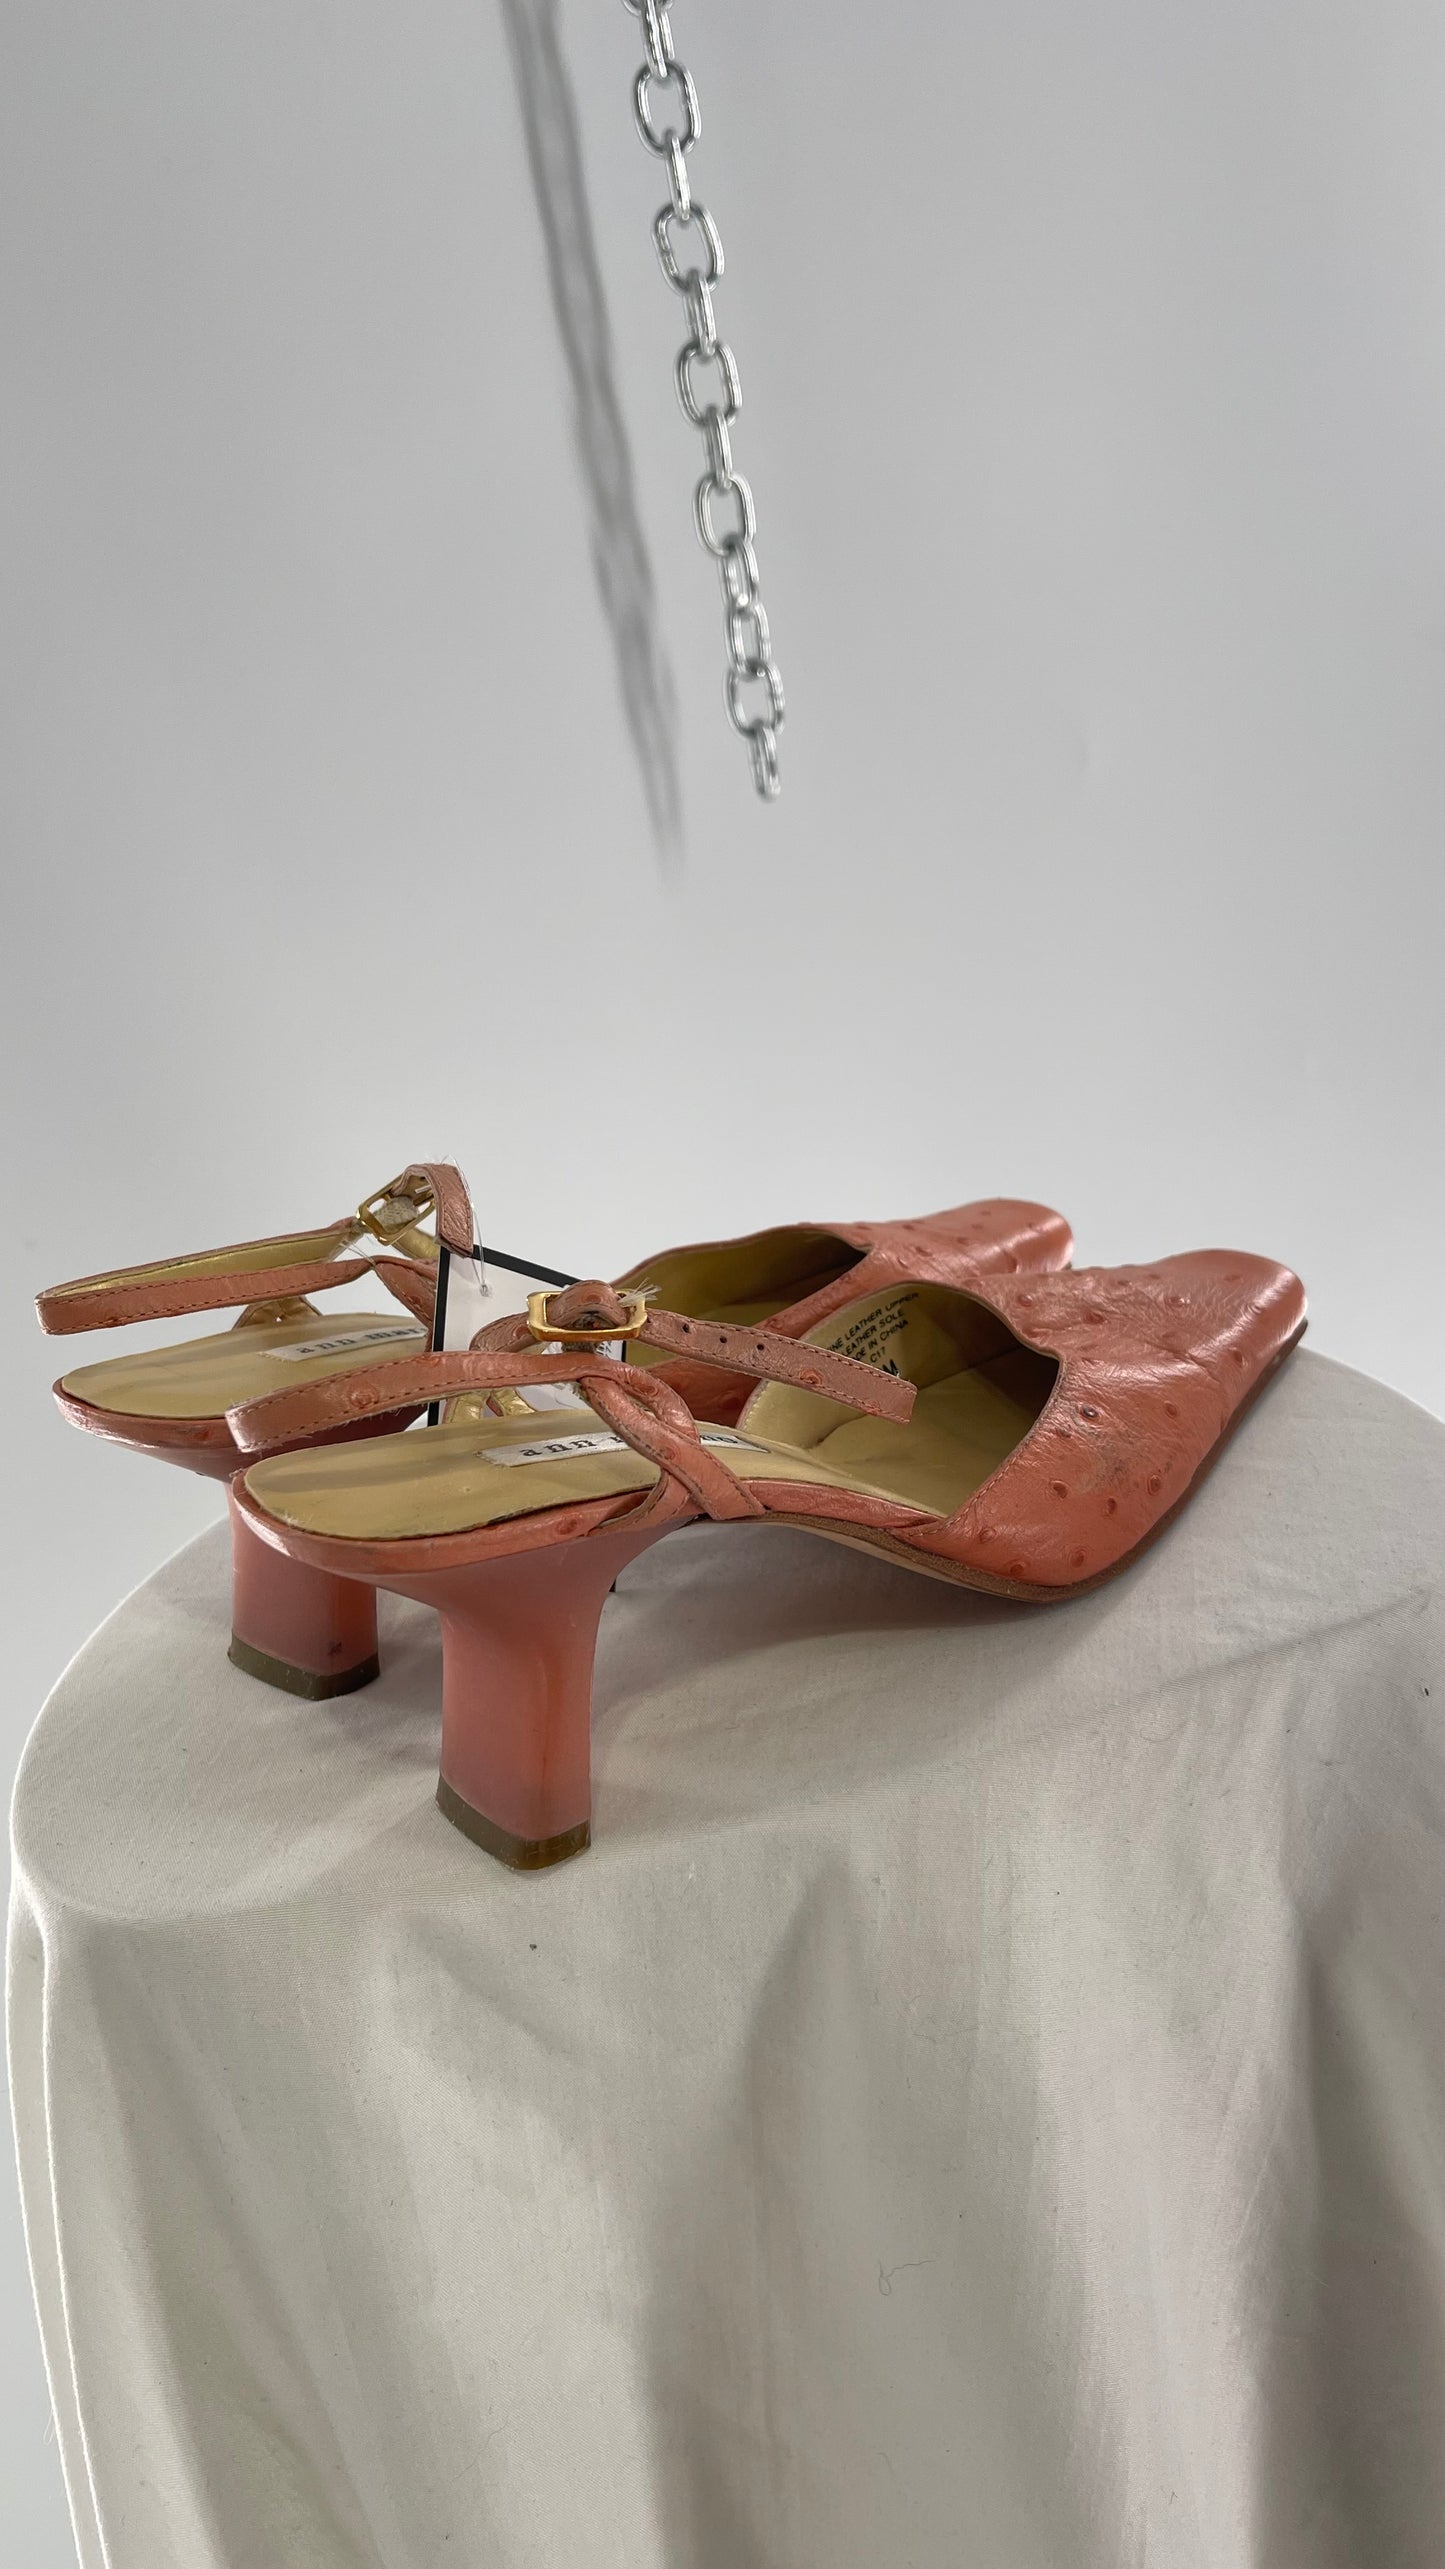 Vintage 1990s Ann Marino Pink Peach Genuine Leather Sling Back Pointed Square Toe Kitten Heel (8)